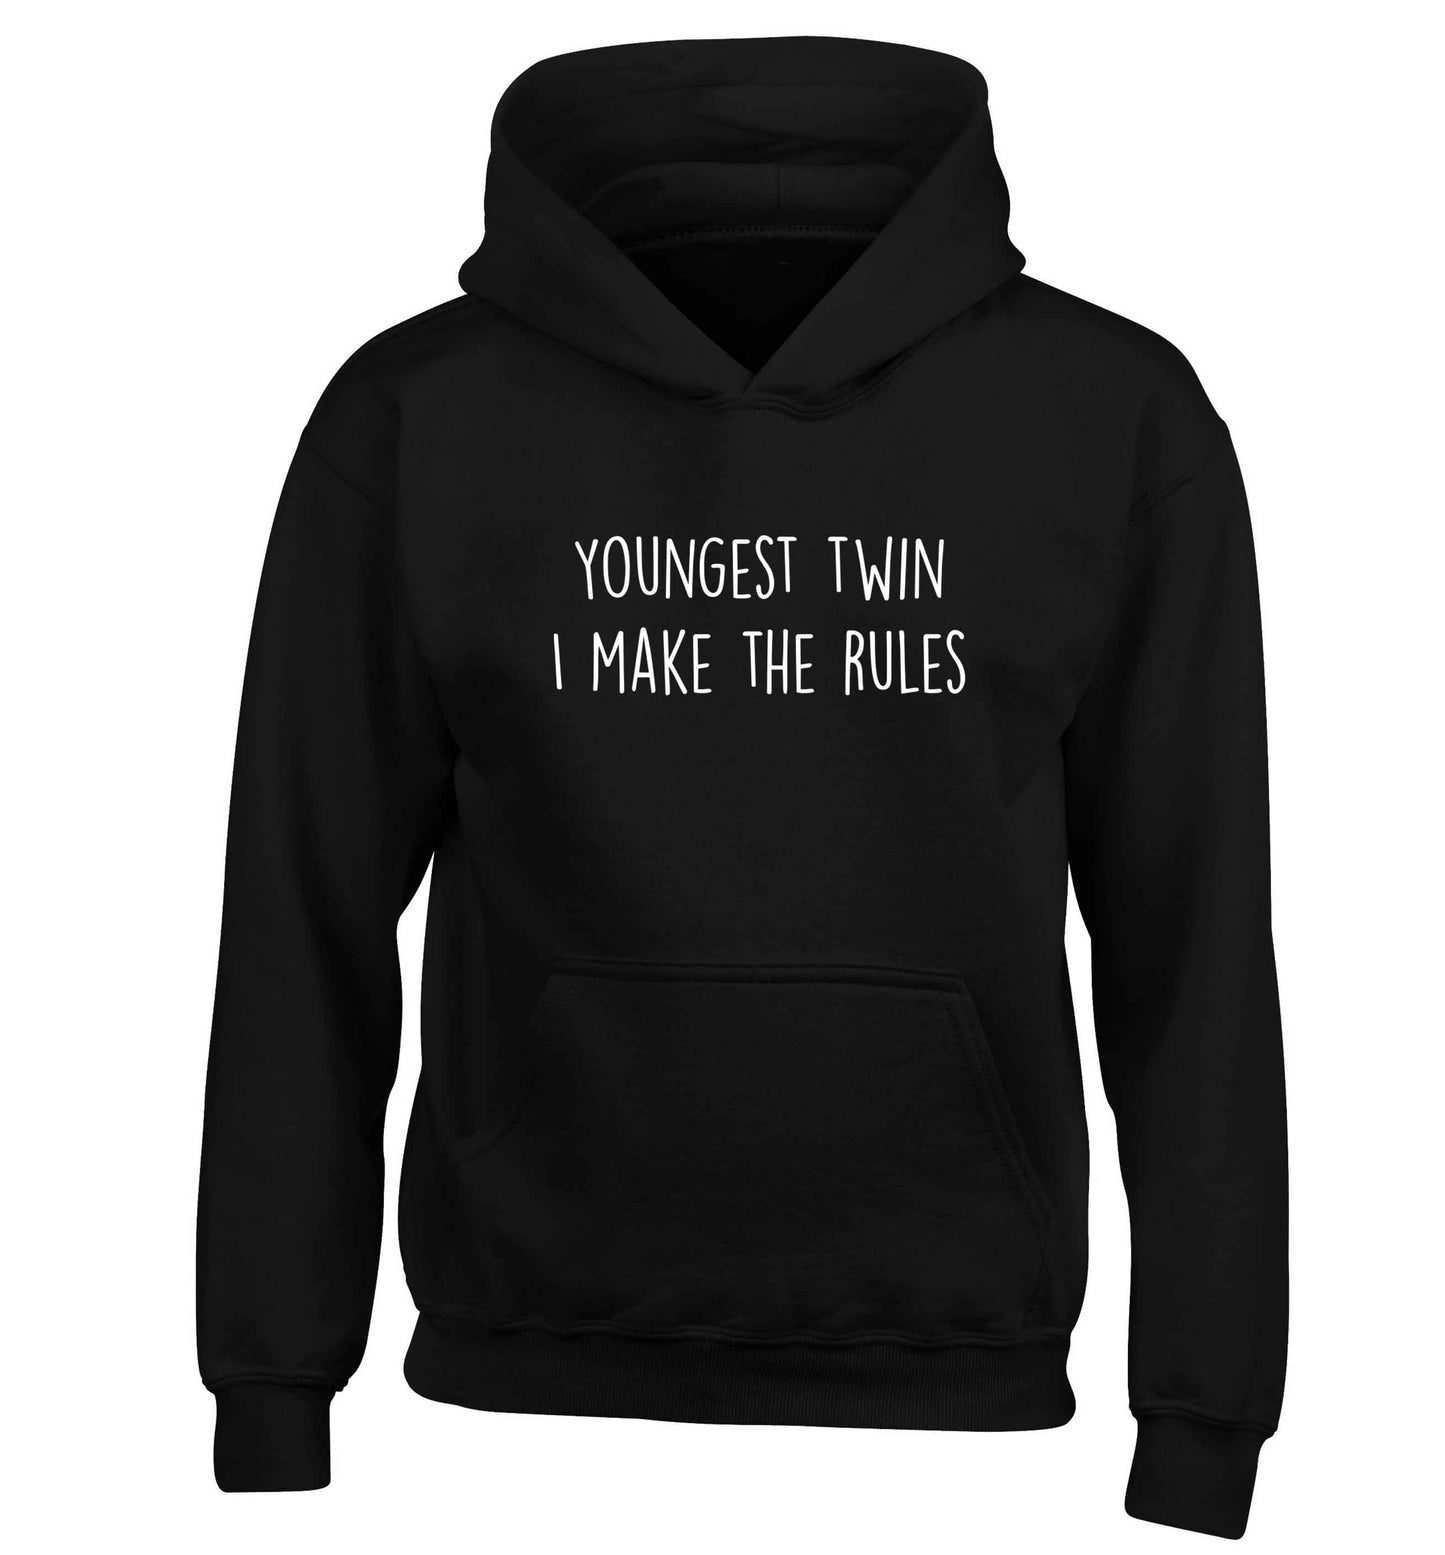 Youngest twin I make the rules children's black hoodie 12-13 Years